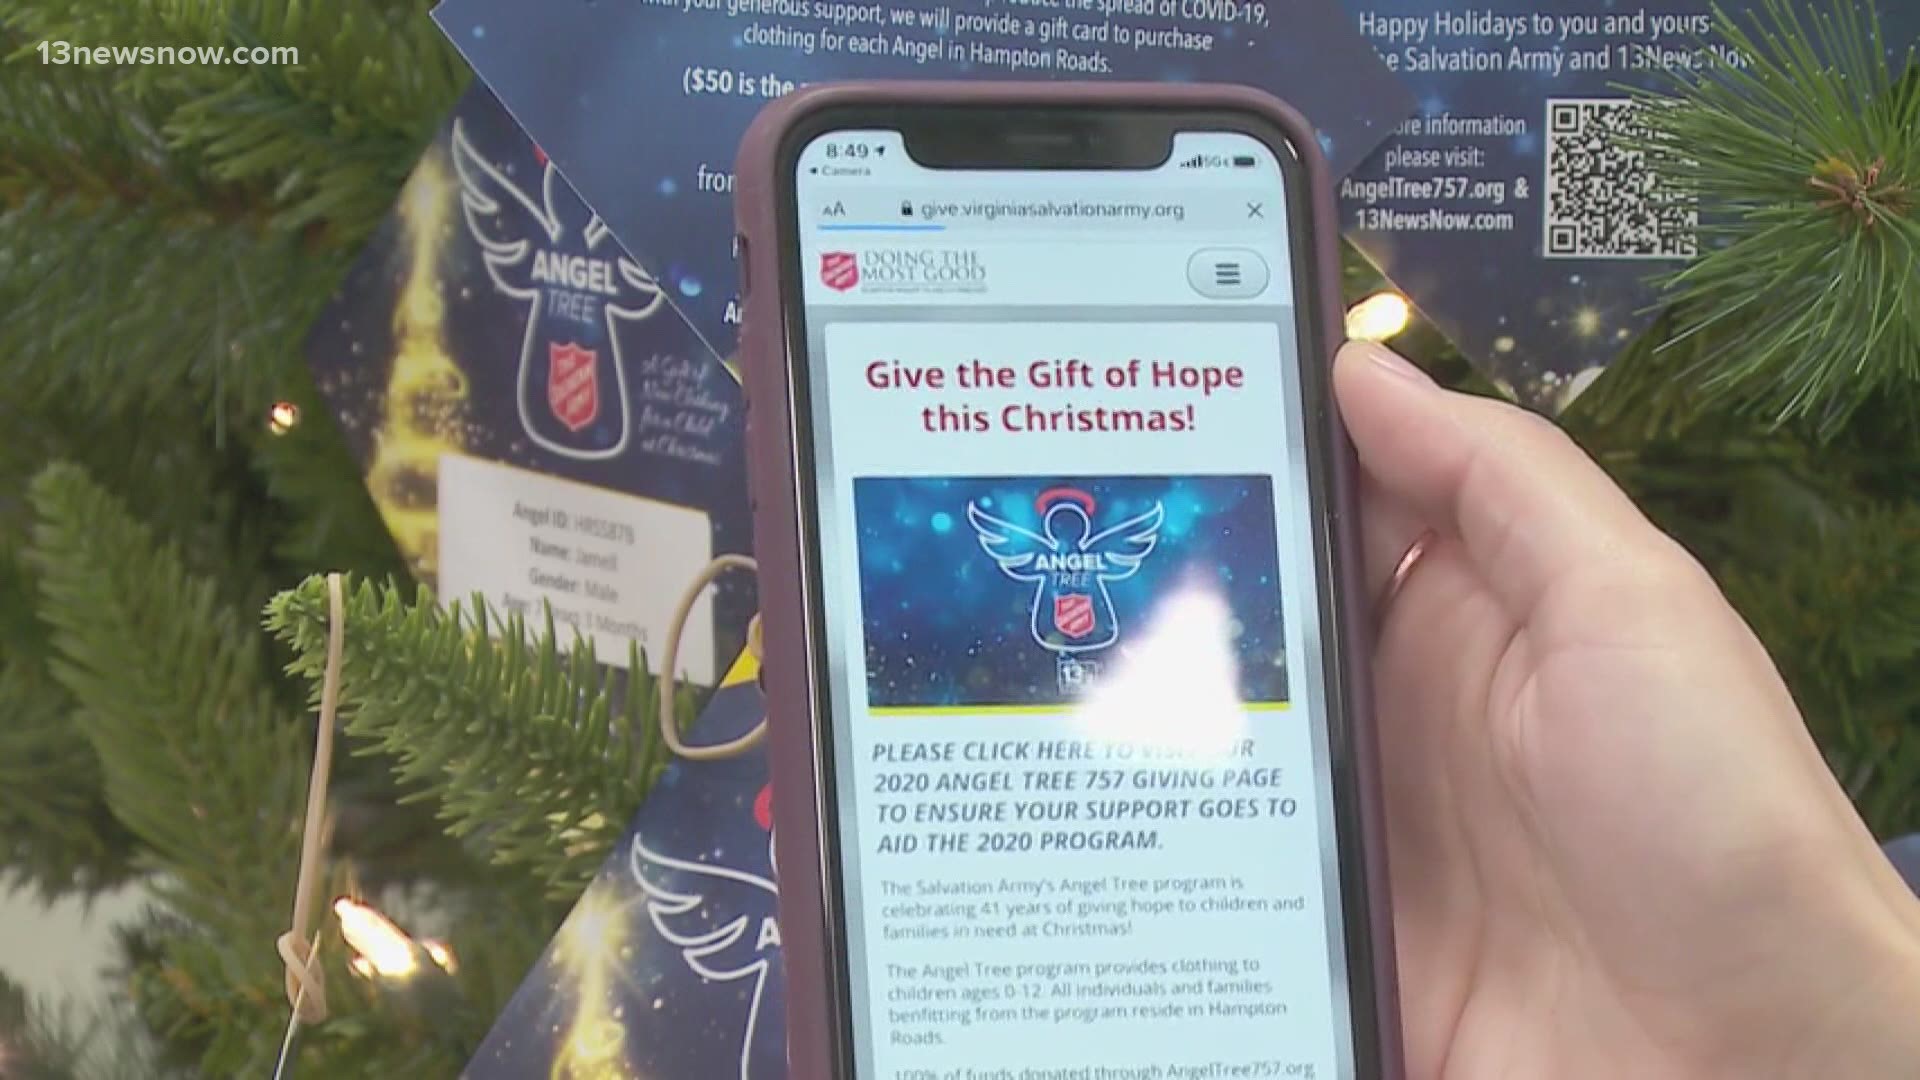 The Salvation Army continues to help families through its Angel Tree program. Because of the pandemic, the process to adopt an angel and give a gift is virtual.